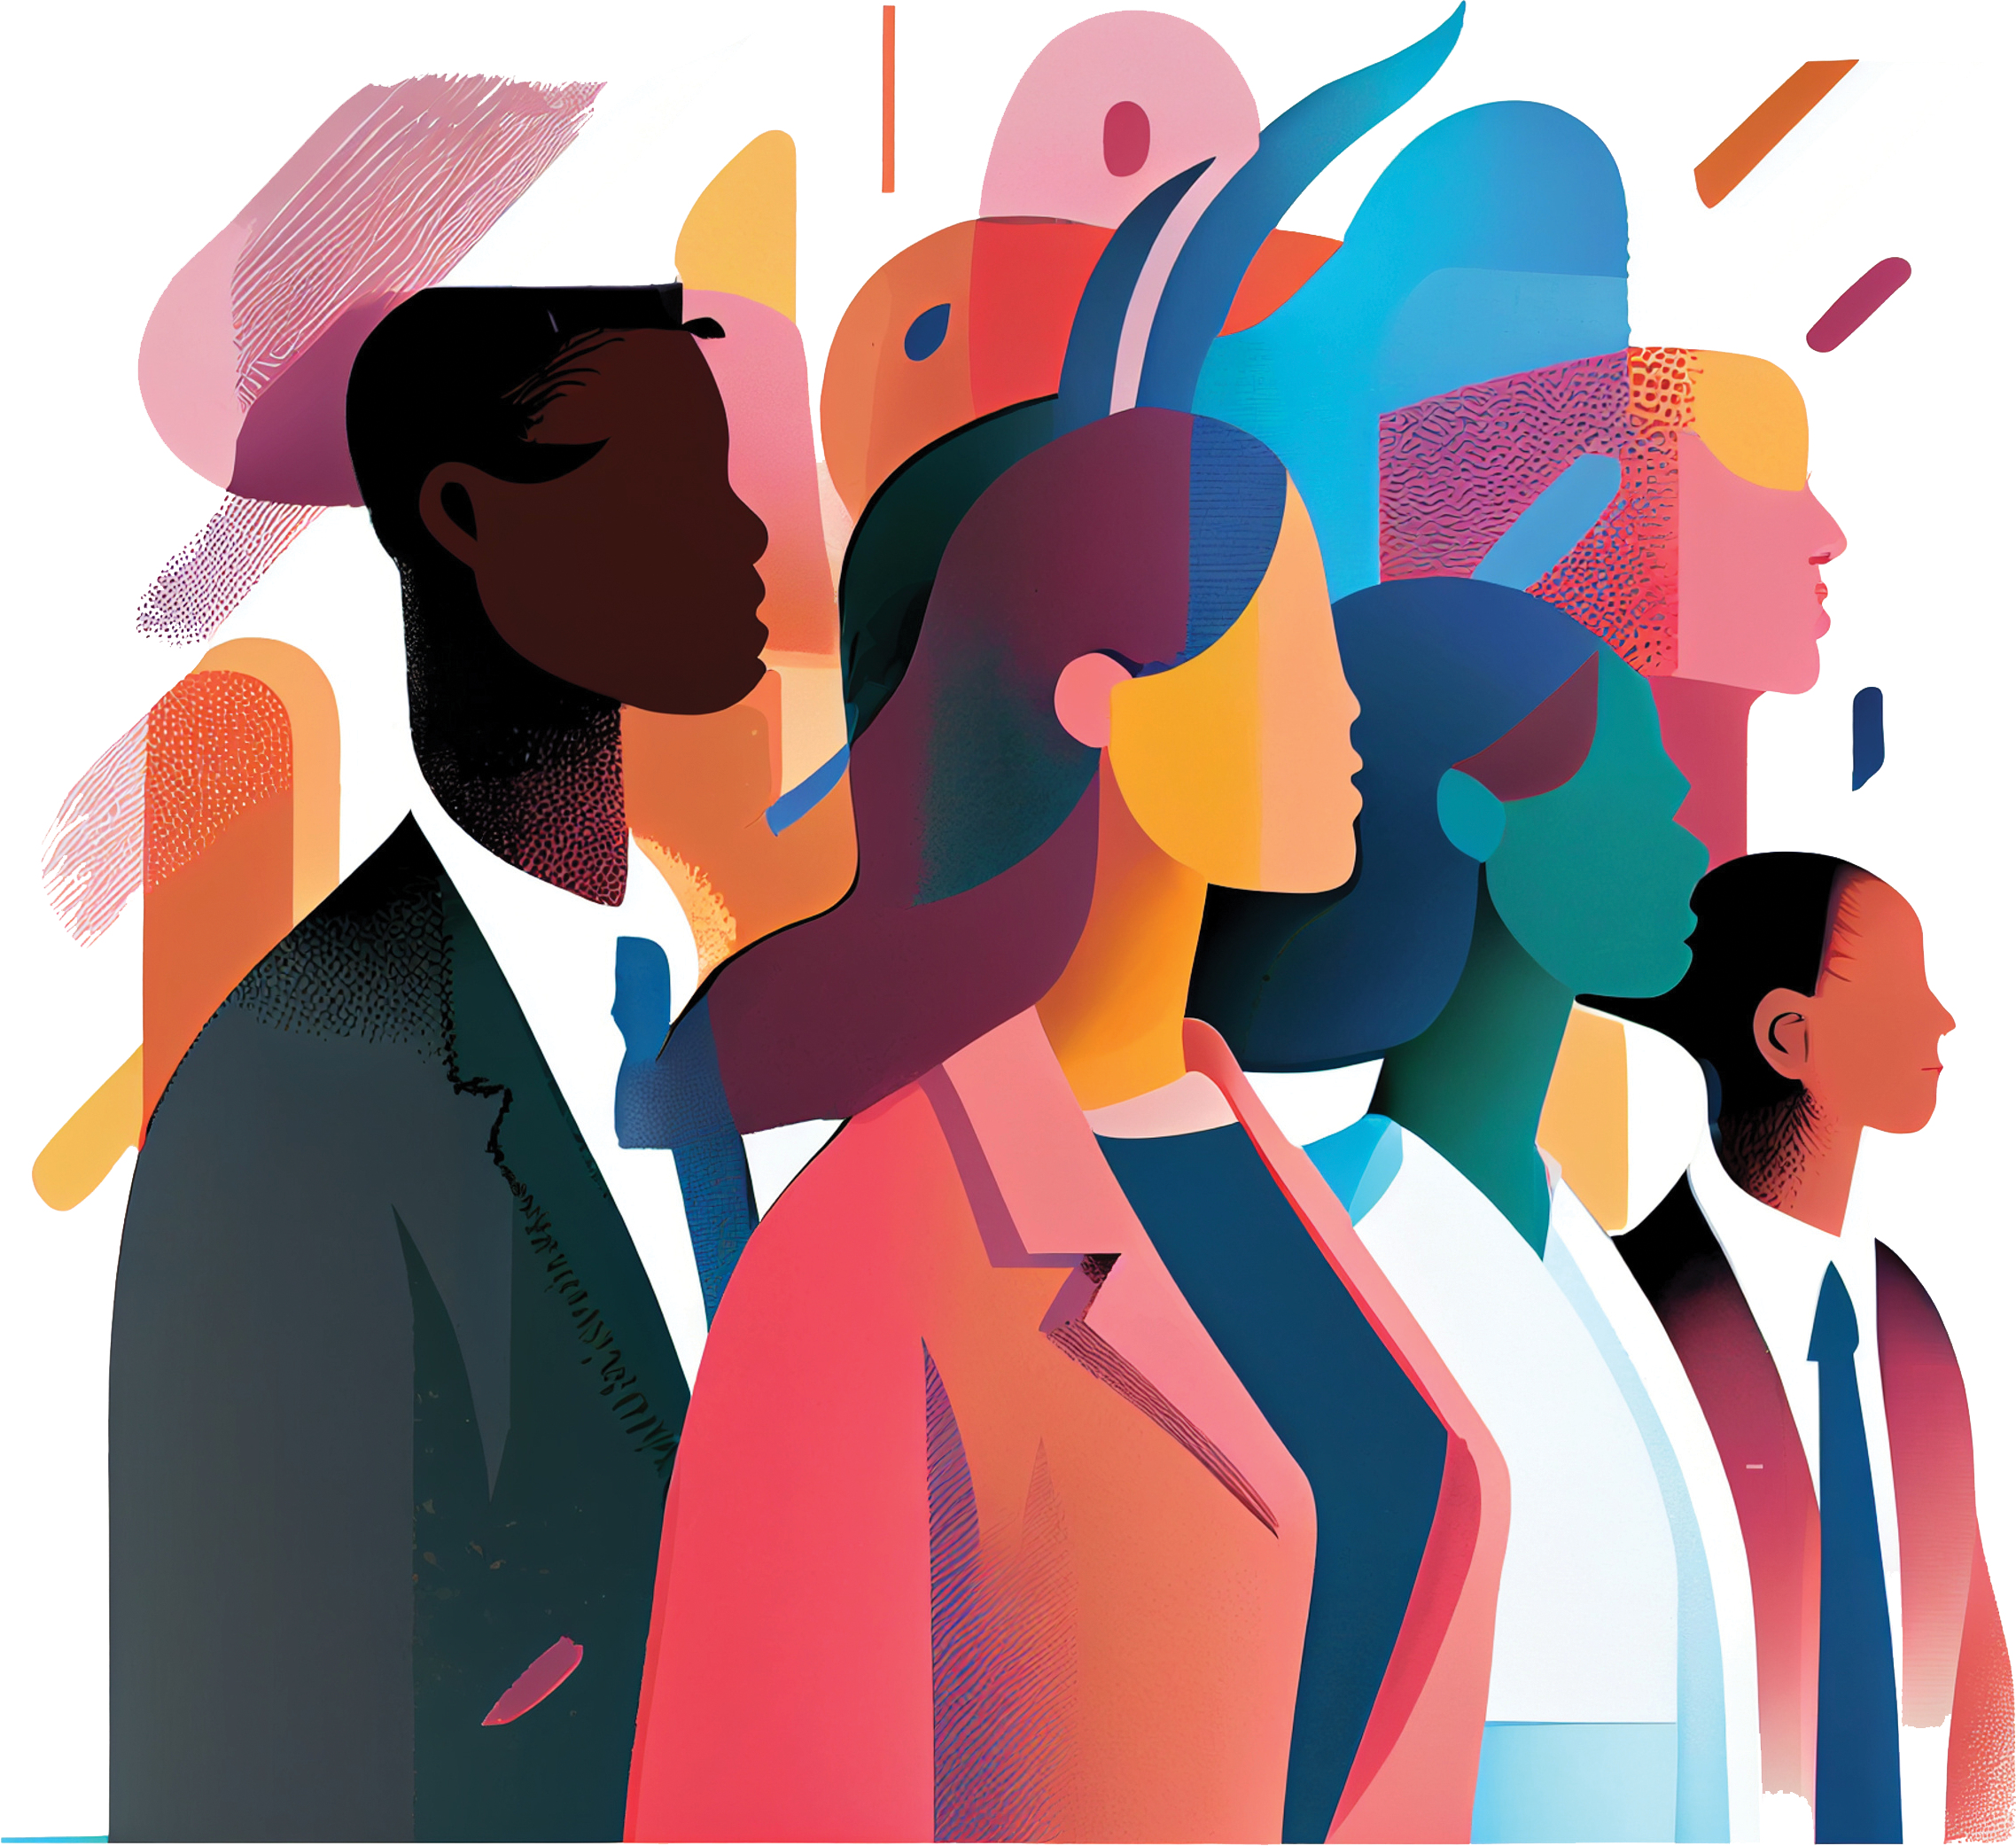  Colorful minimalist illustration of a racially diverse group of people in business attire looking to the distance